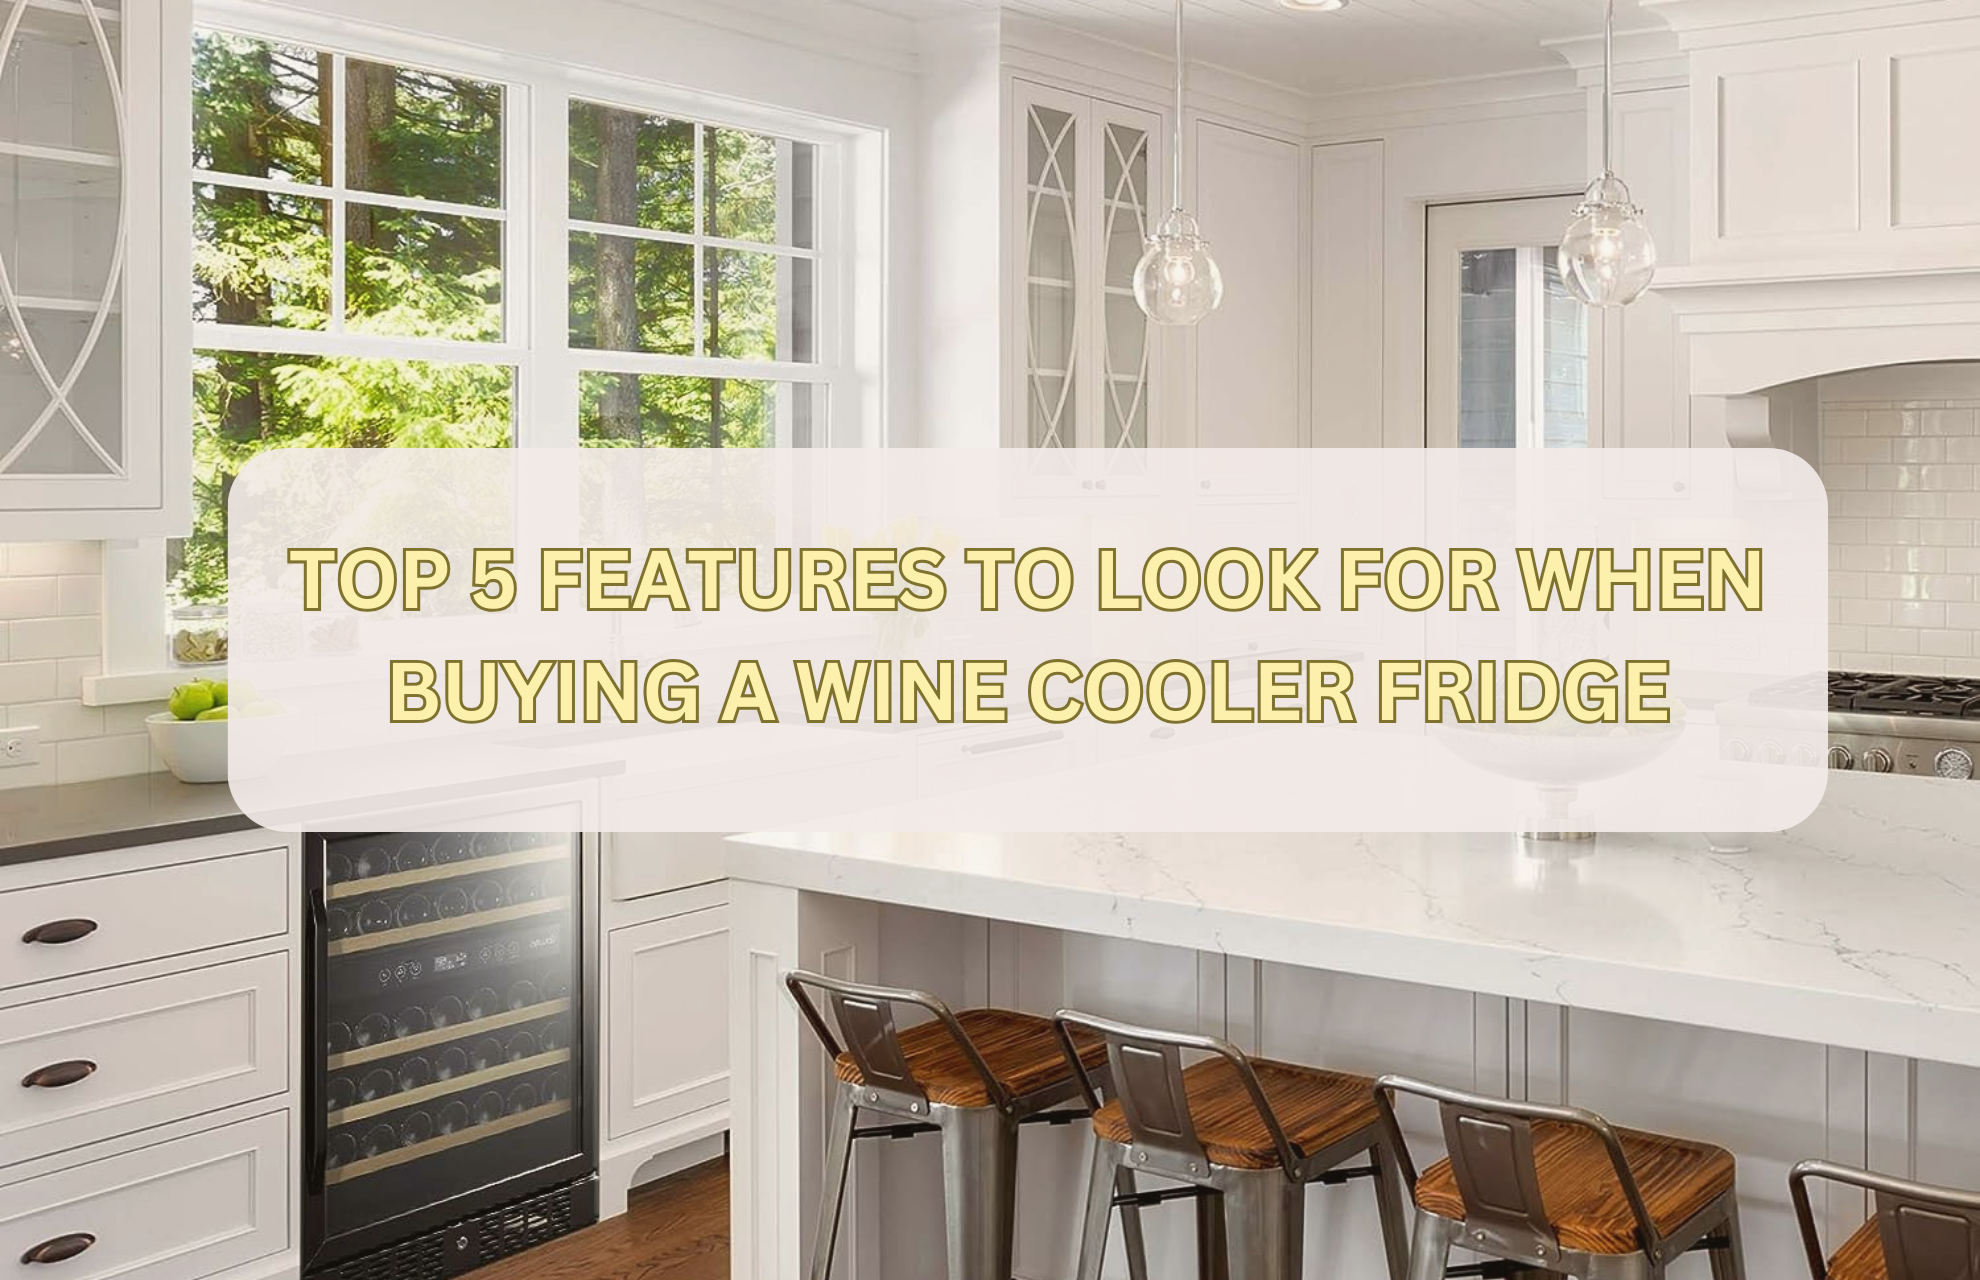 TOP 5 FEATURES TO LOOK FOR WHEN BUYING A WINE COOLER FRIDGE